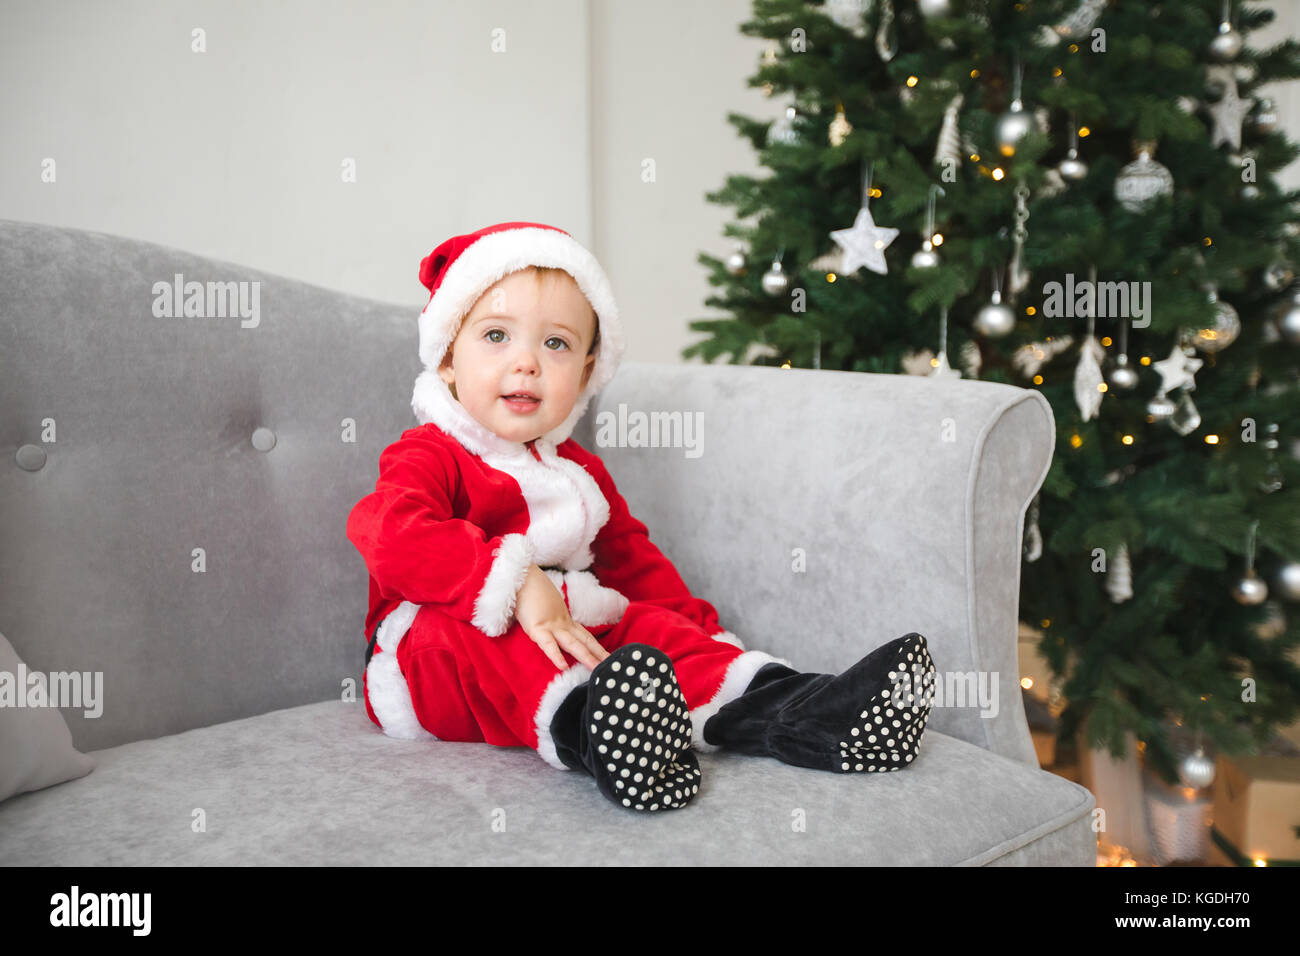 Baby in santa suit sit on sofa with Christmas tree Stock Photo